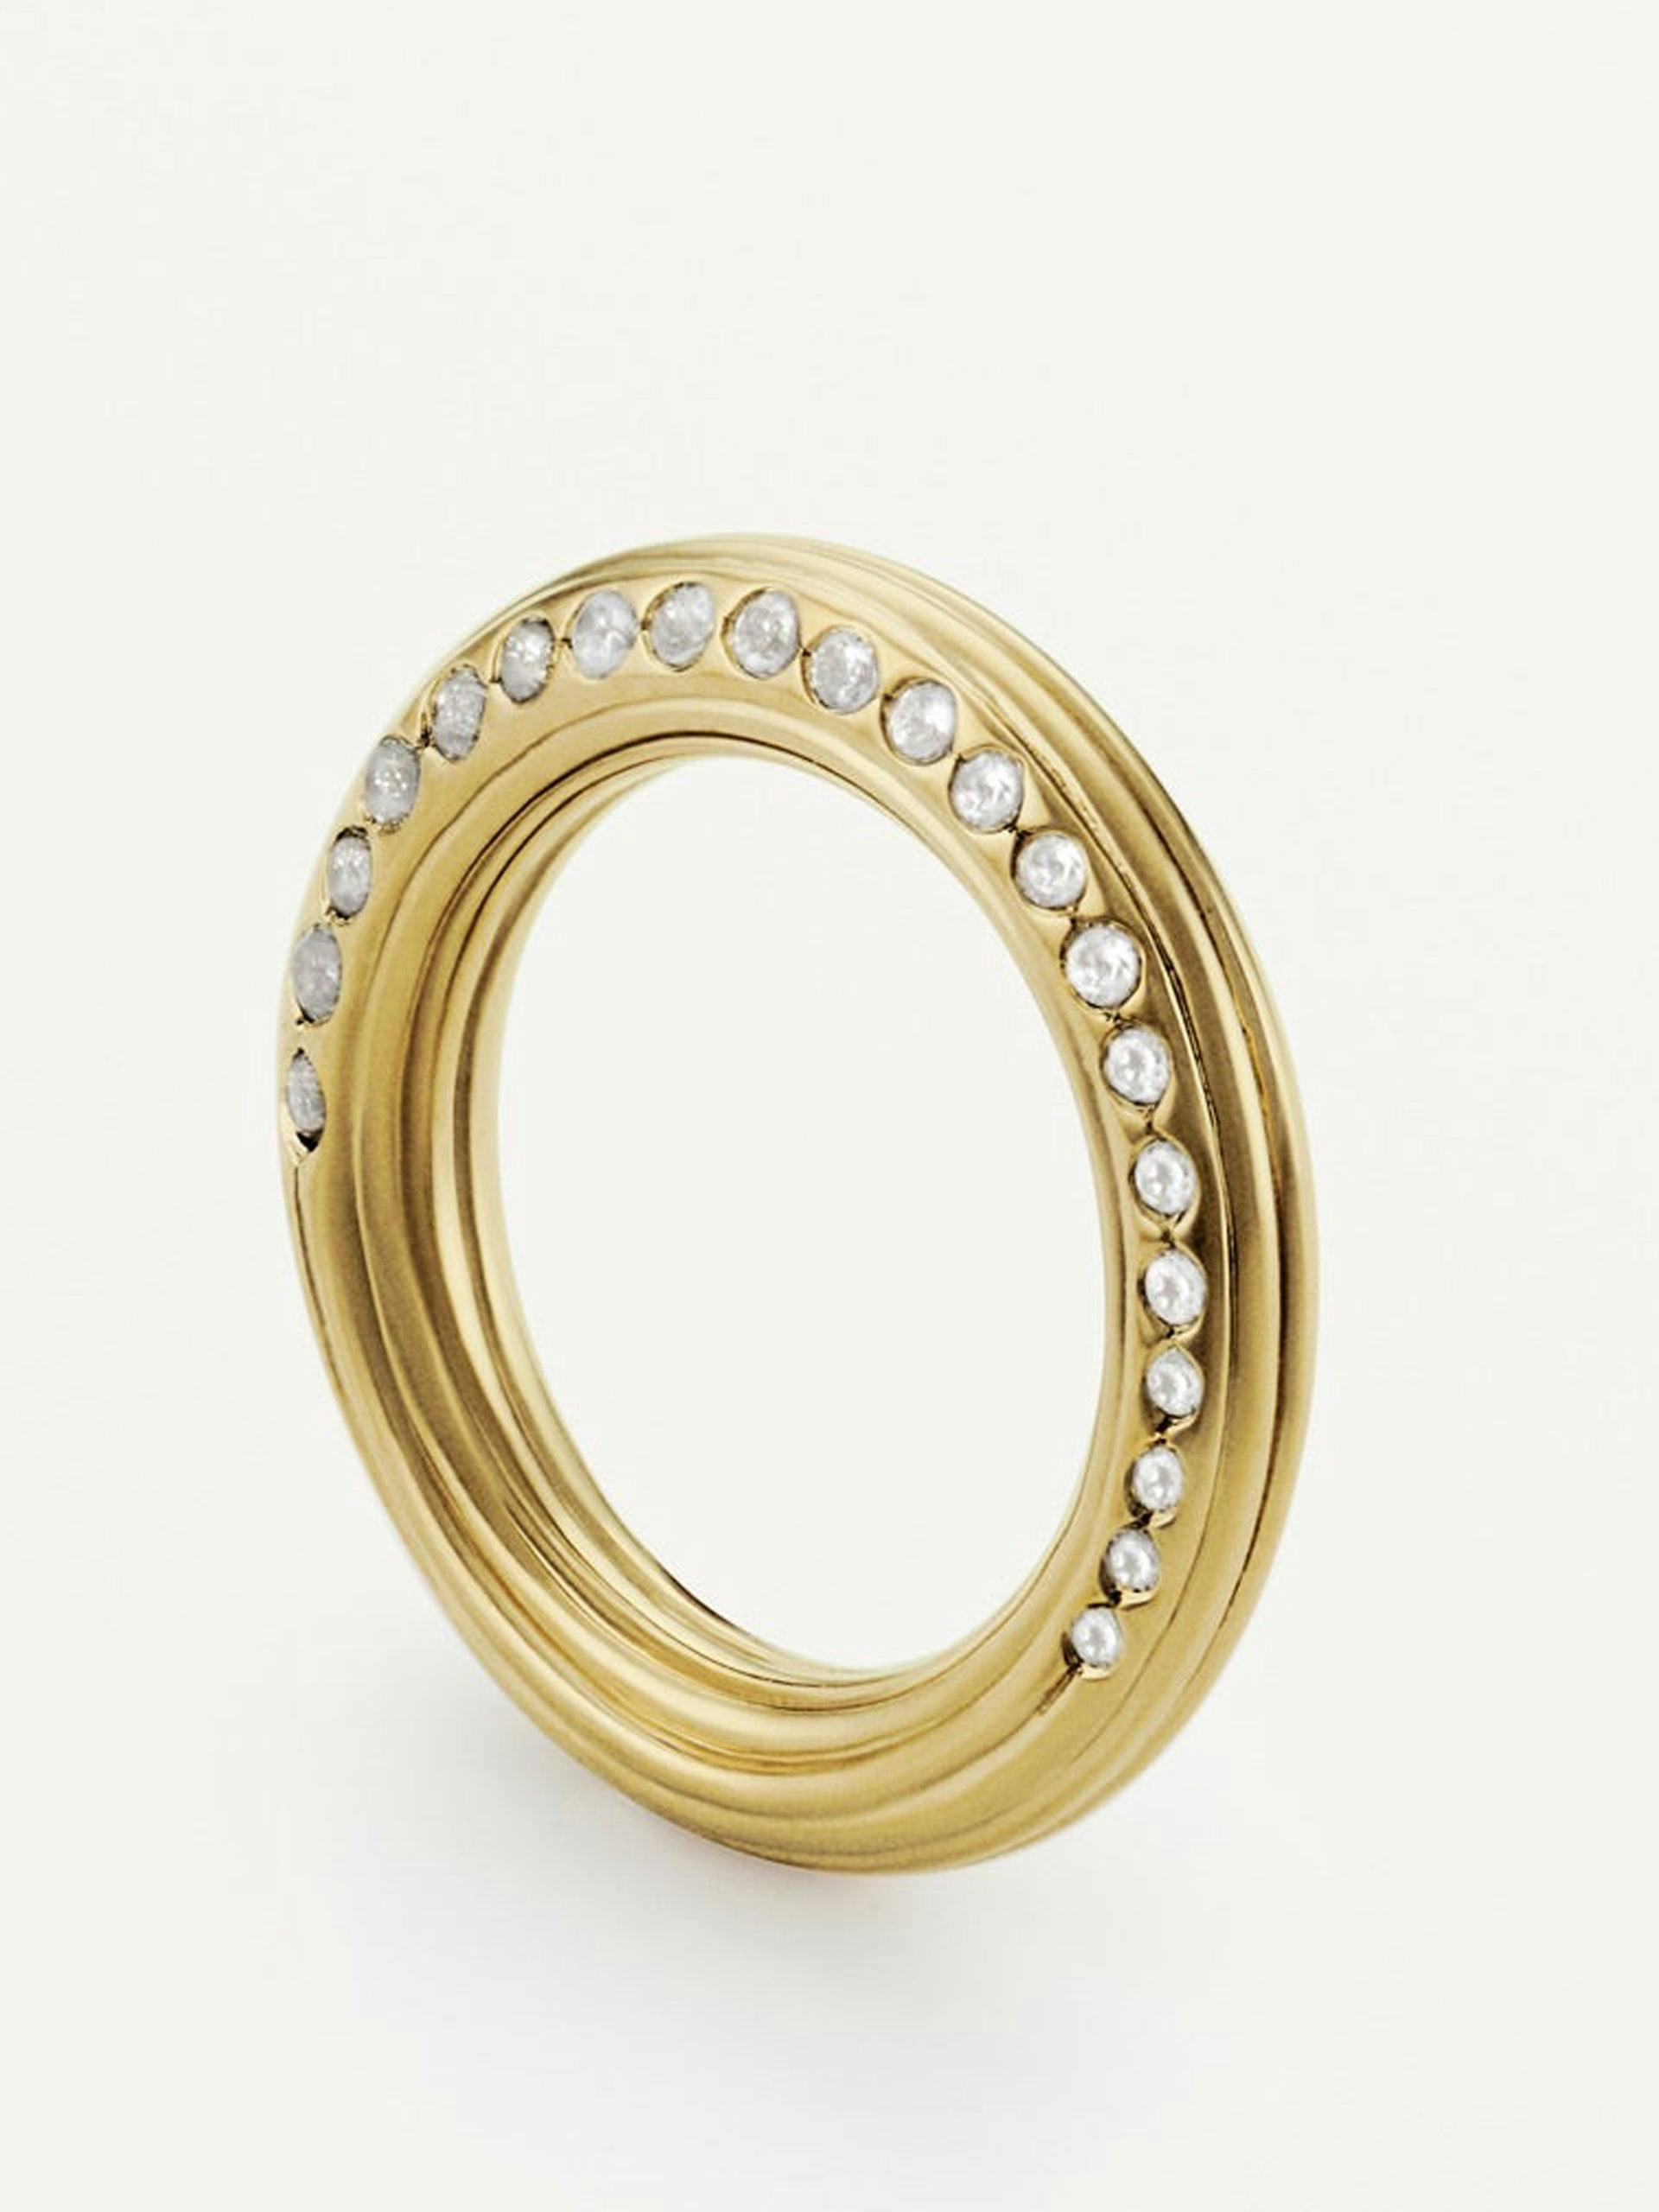 18kt gold vermeil ring with white topaz